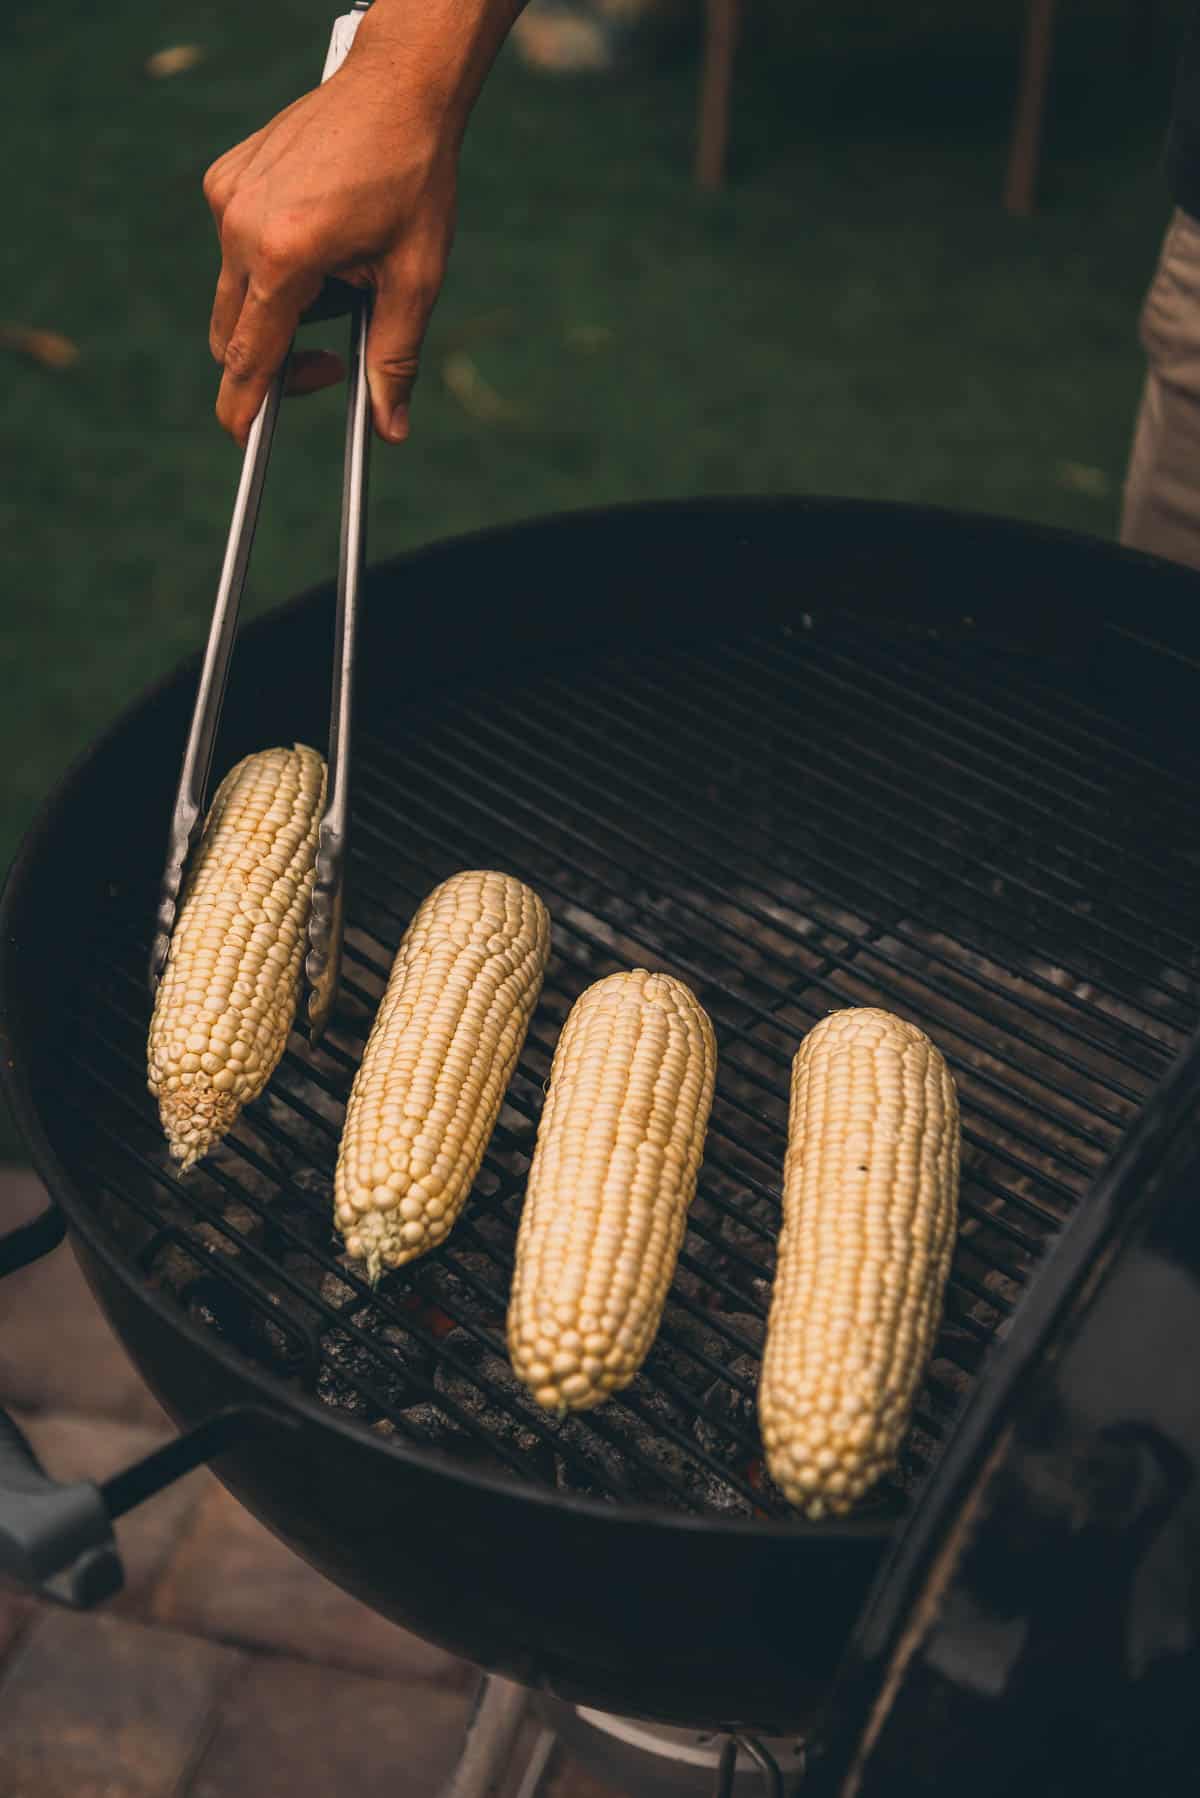 Hand with tongs placing corn on the grill.